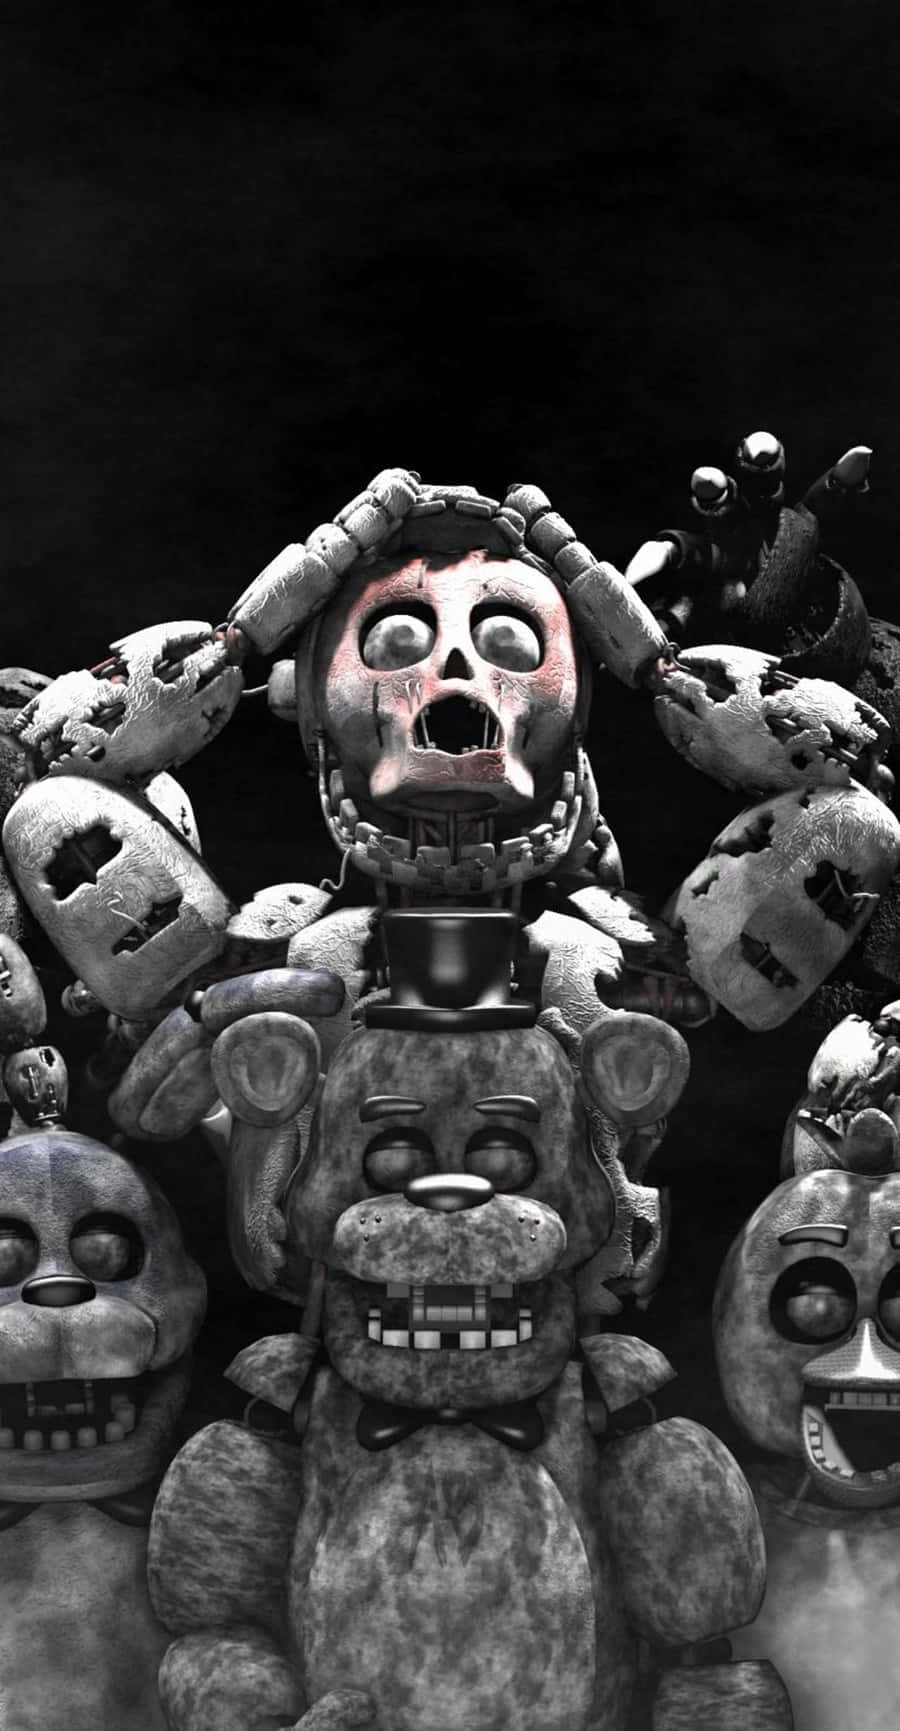 HD Free Wallpapers for Five Nights at Freddys 234 Edition  FNAF  Wallpaper  Photos  AppRecs